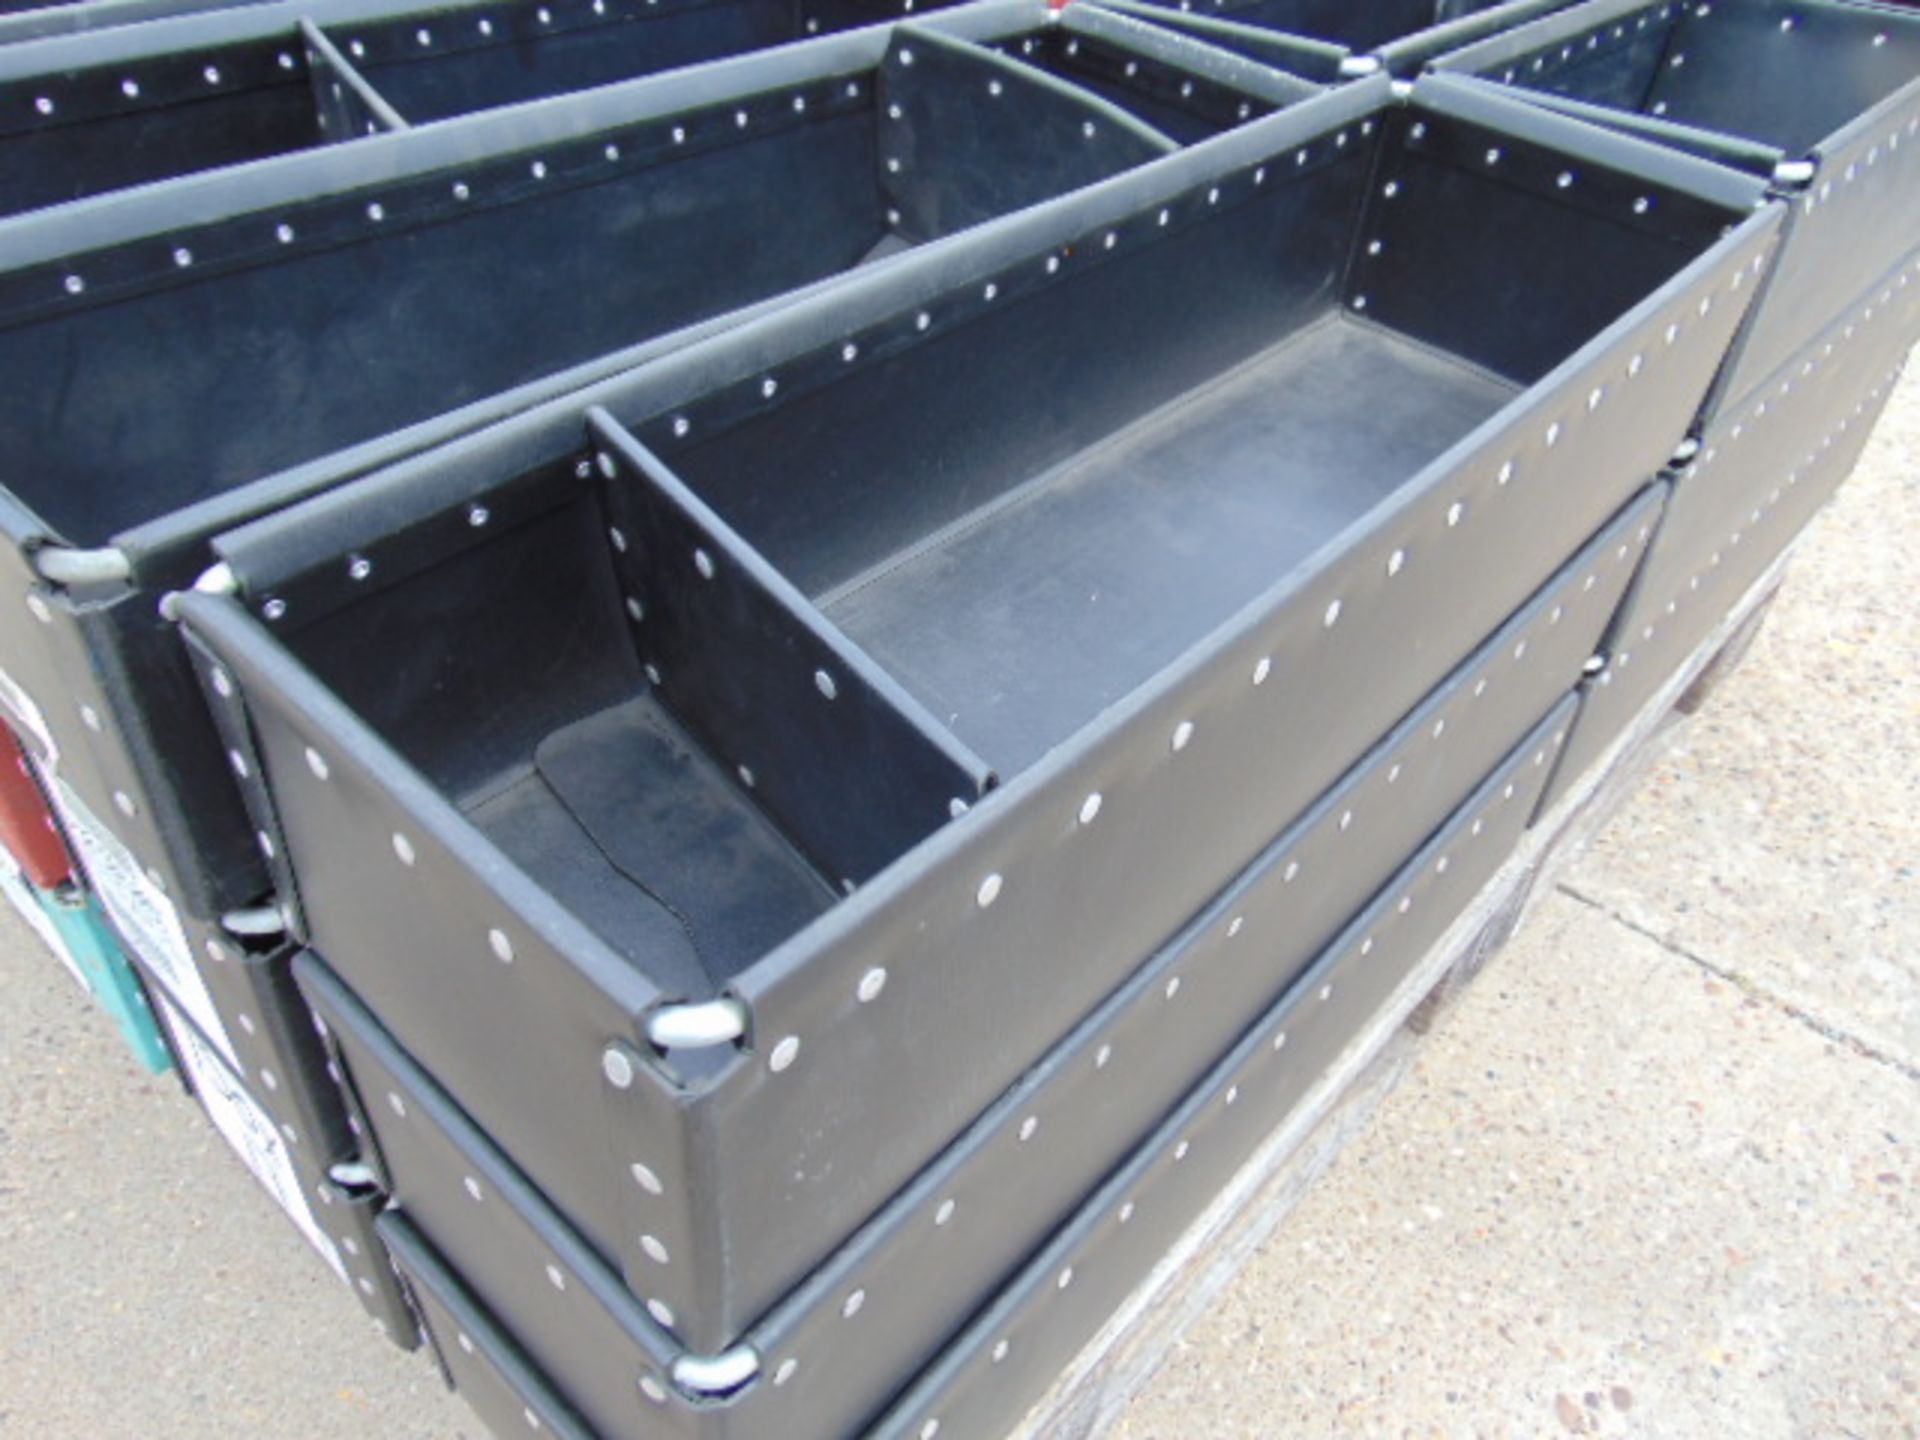 30 x Heavy Duty Tote Storage Boxes with Dividers - Image 6 of 8